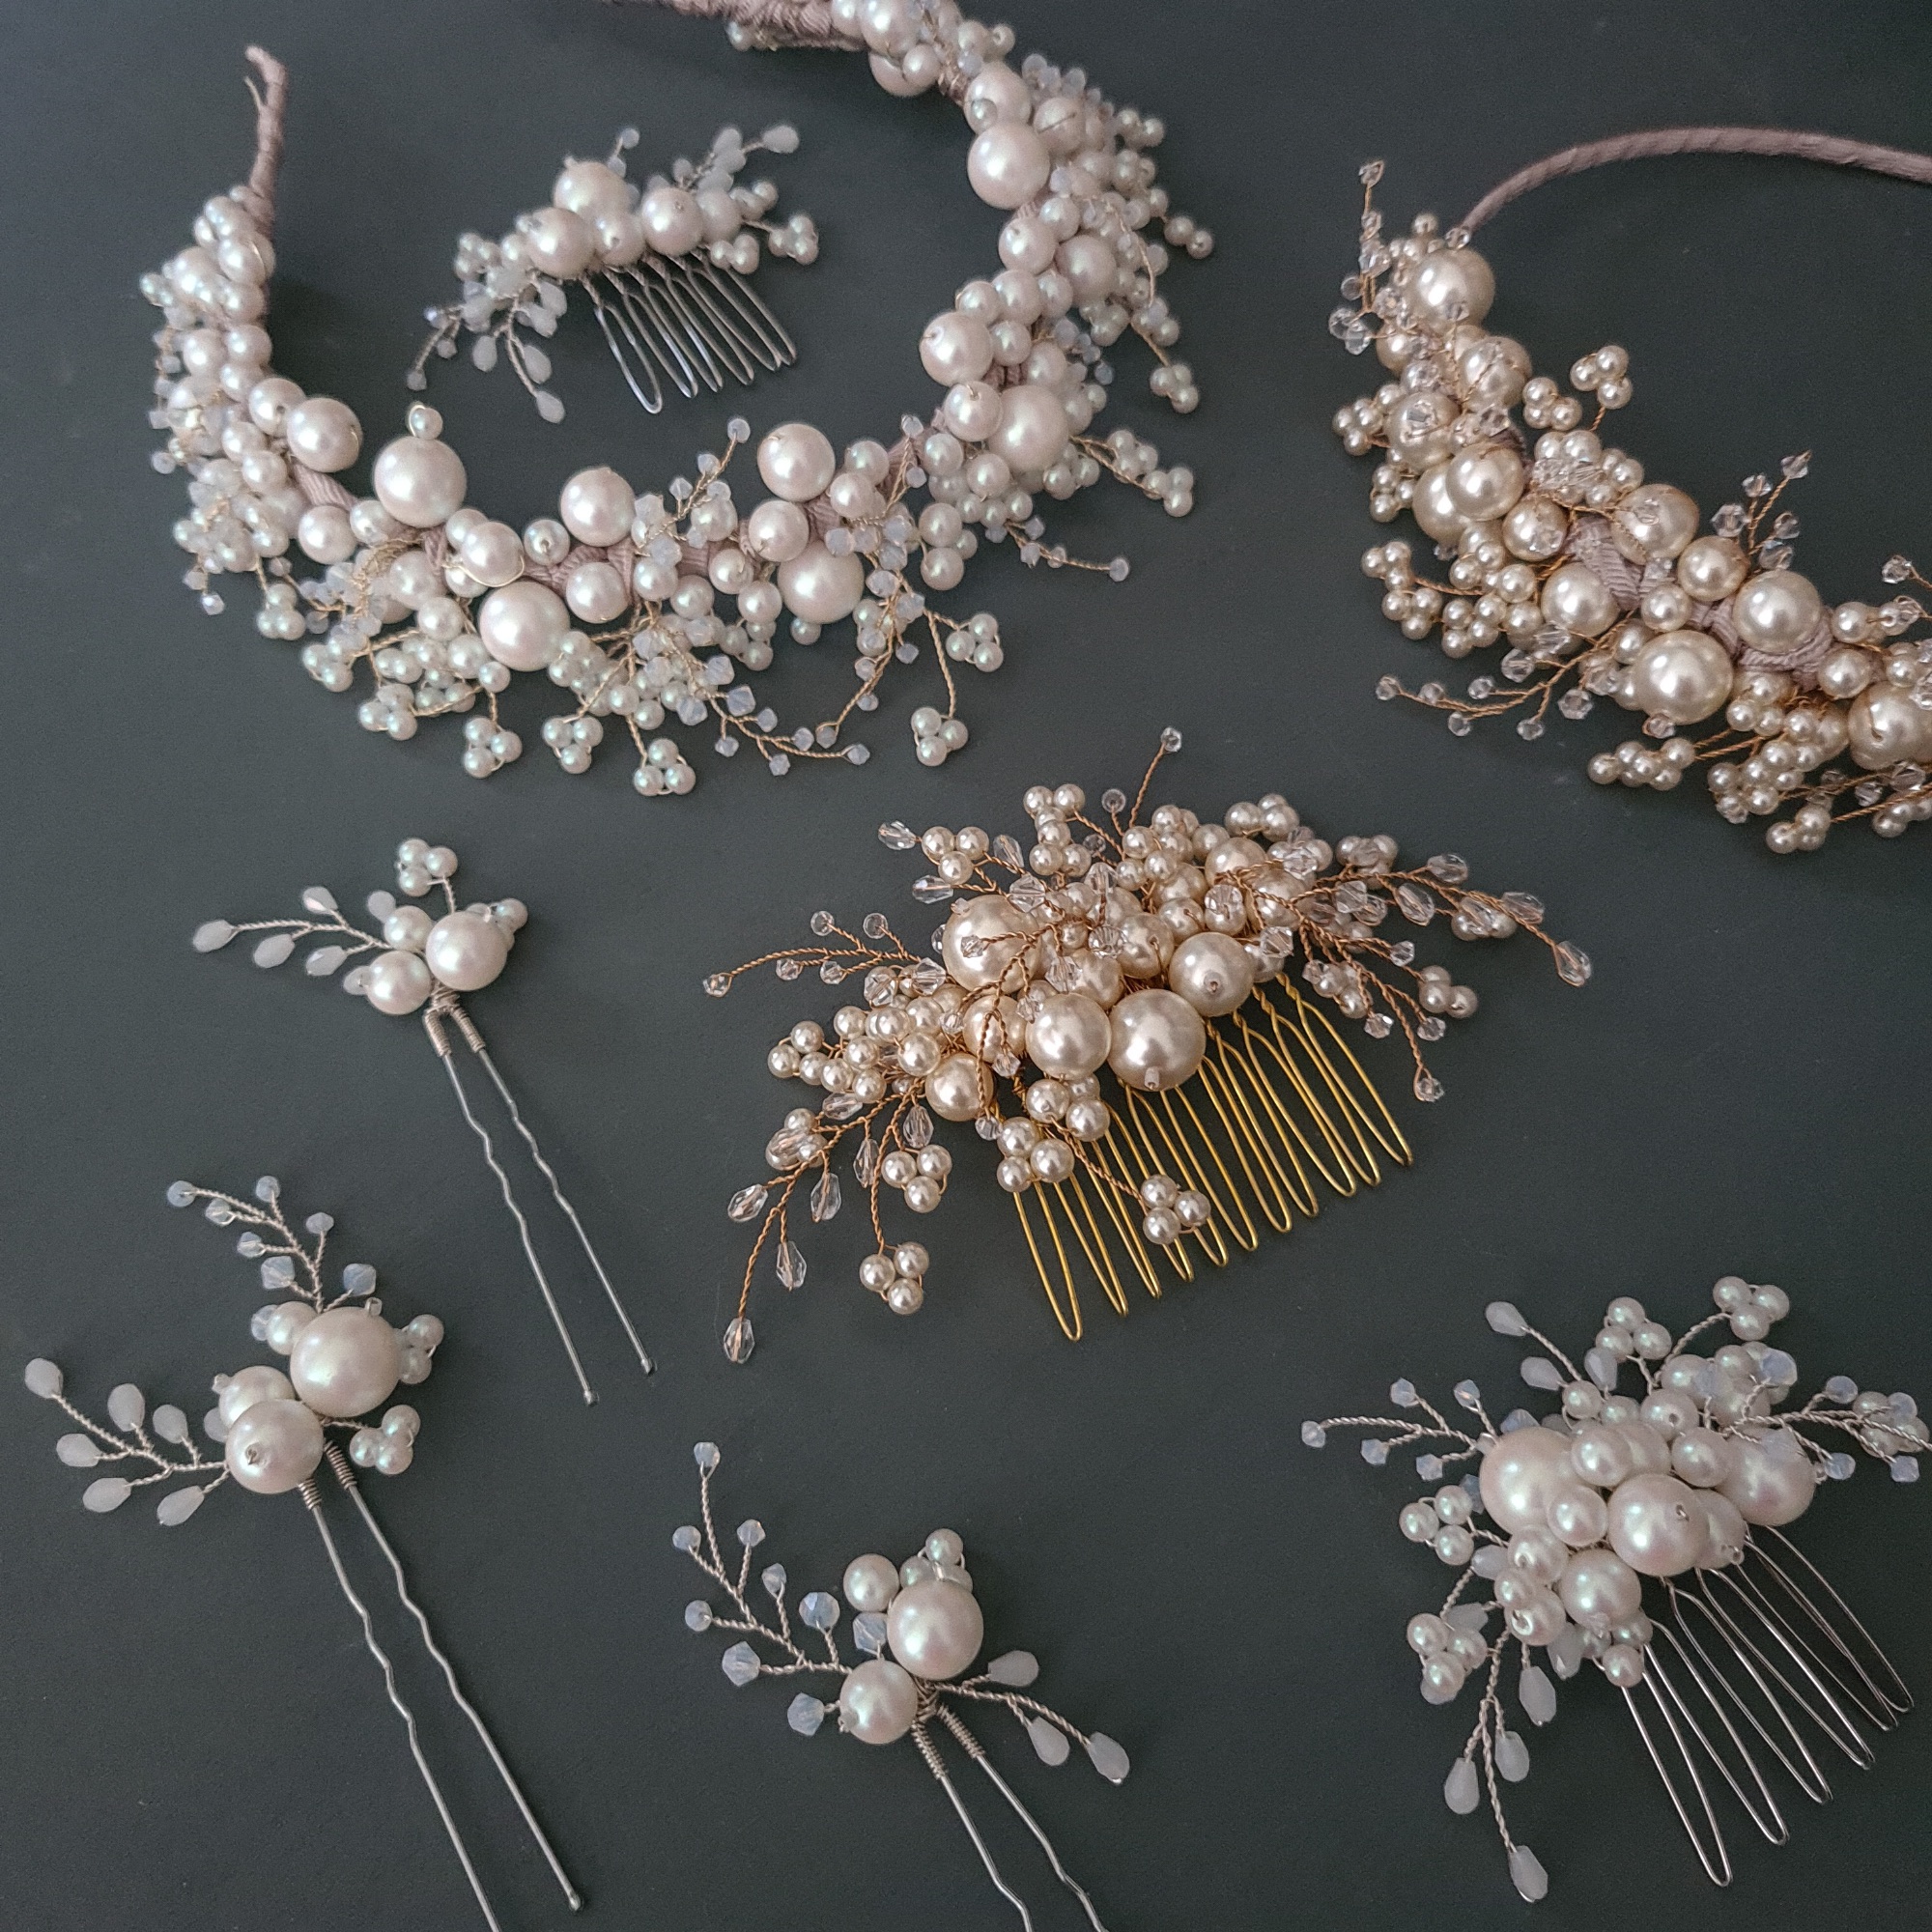 Handmade bridal hair accessories made from oversized pearls